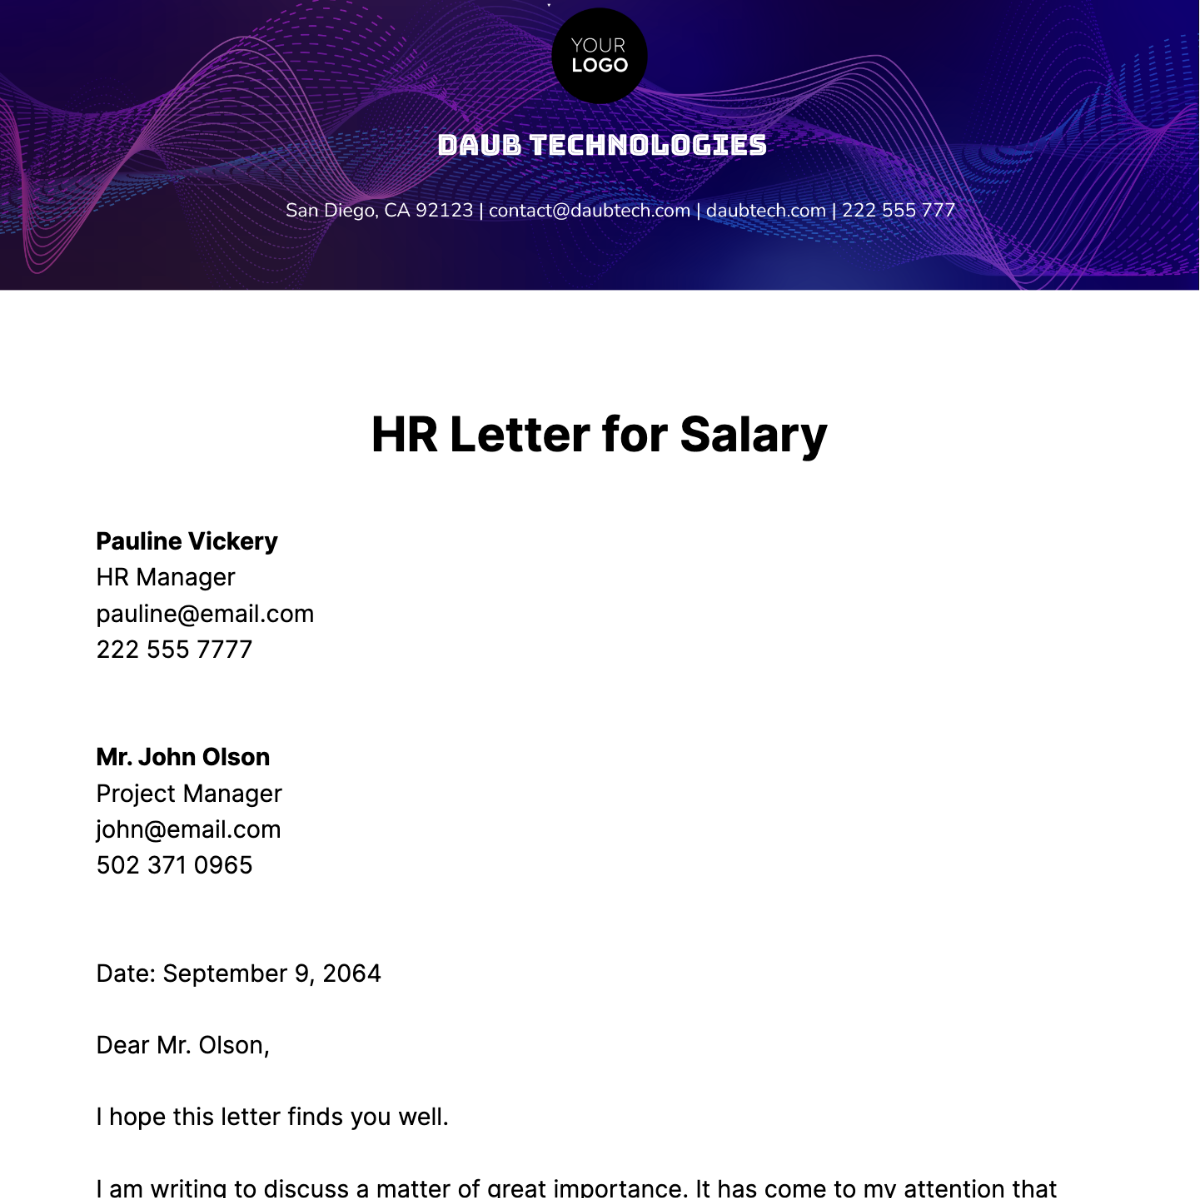 HR Letter for Salary Template